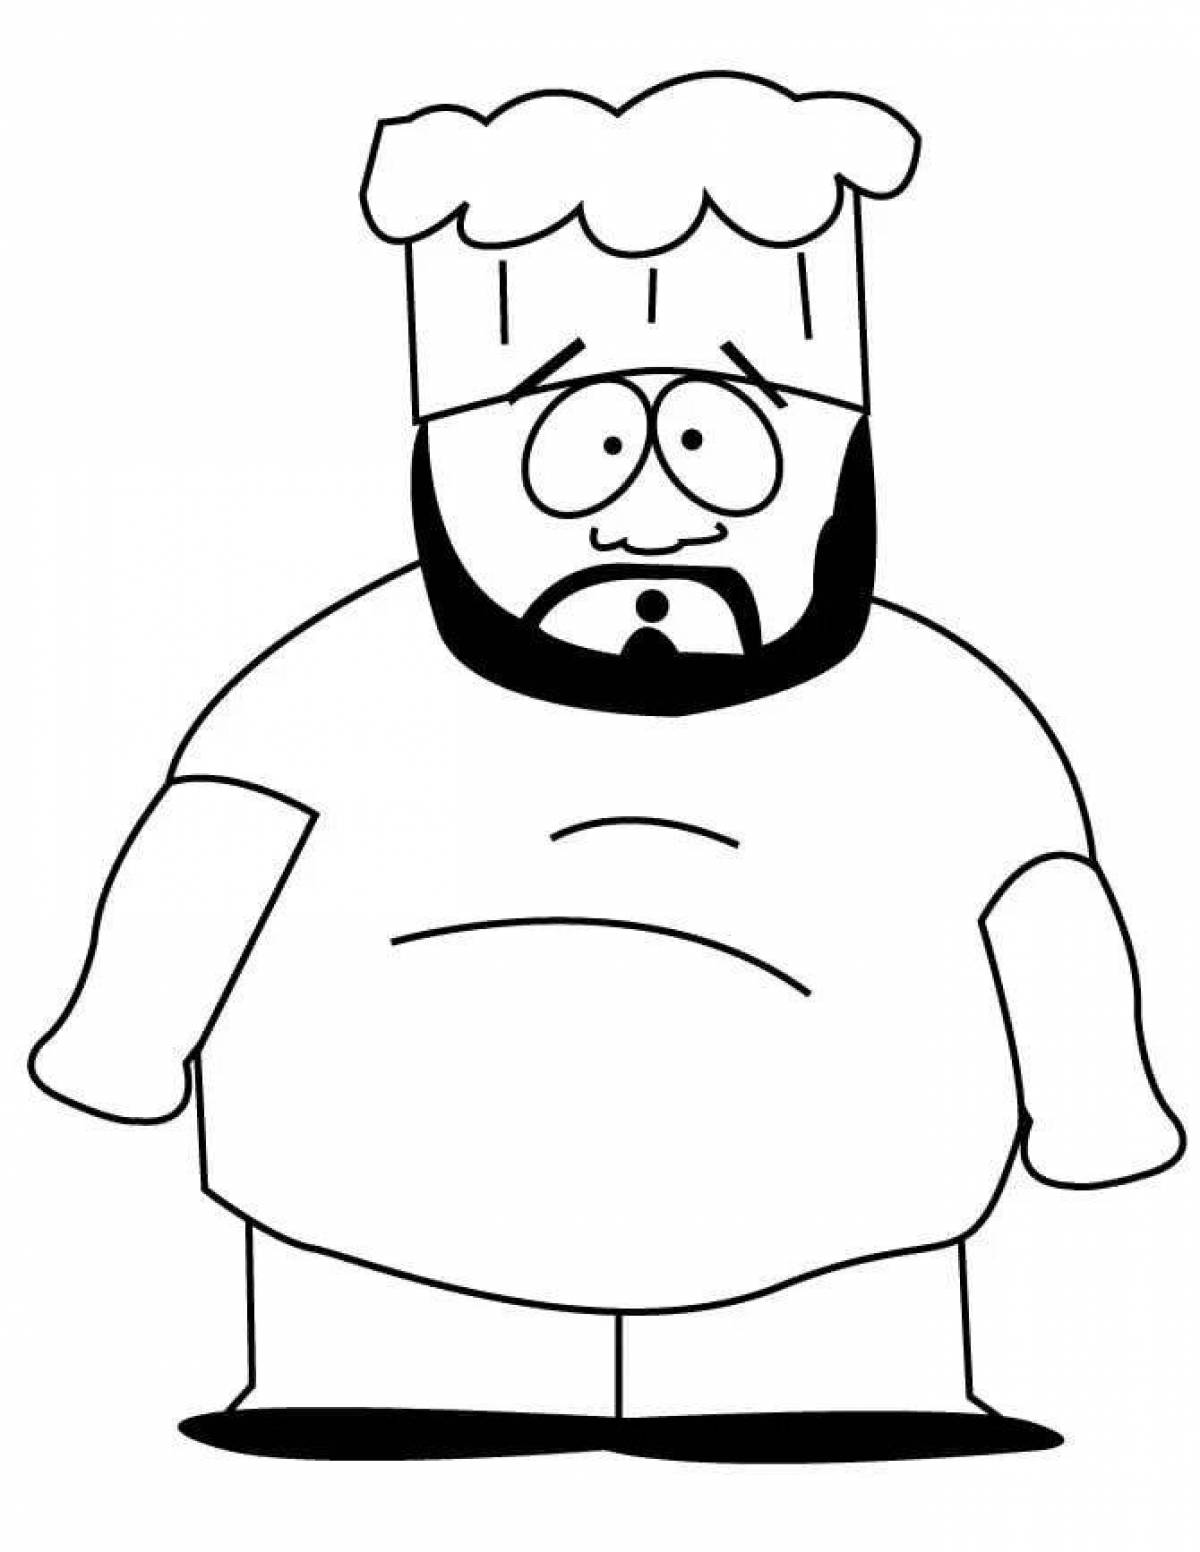 Kenny crazy coloring pages